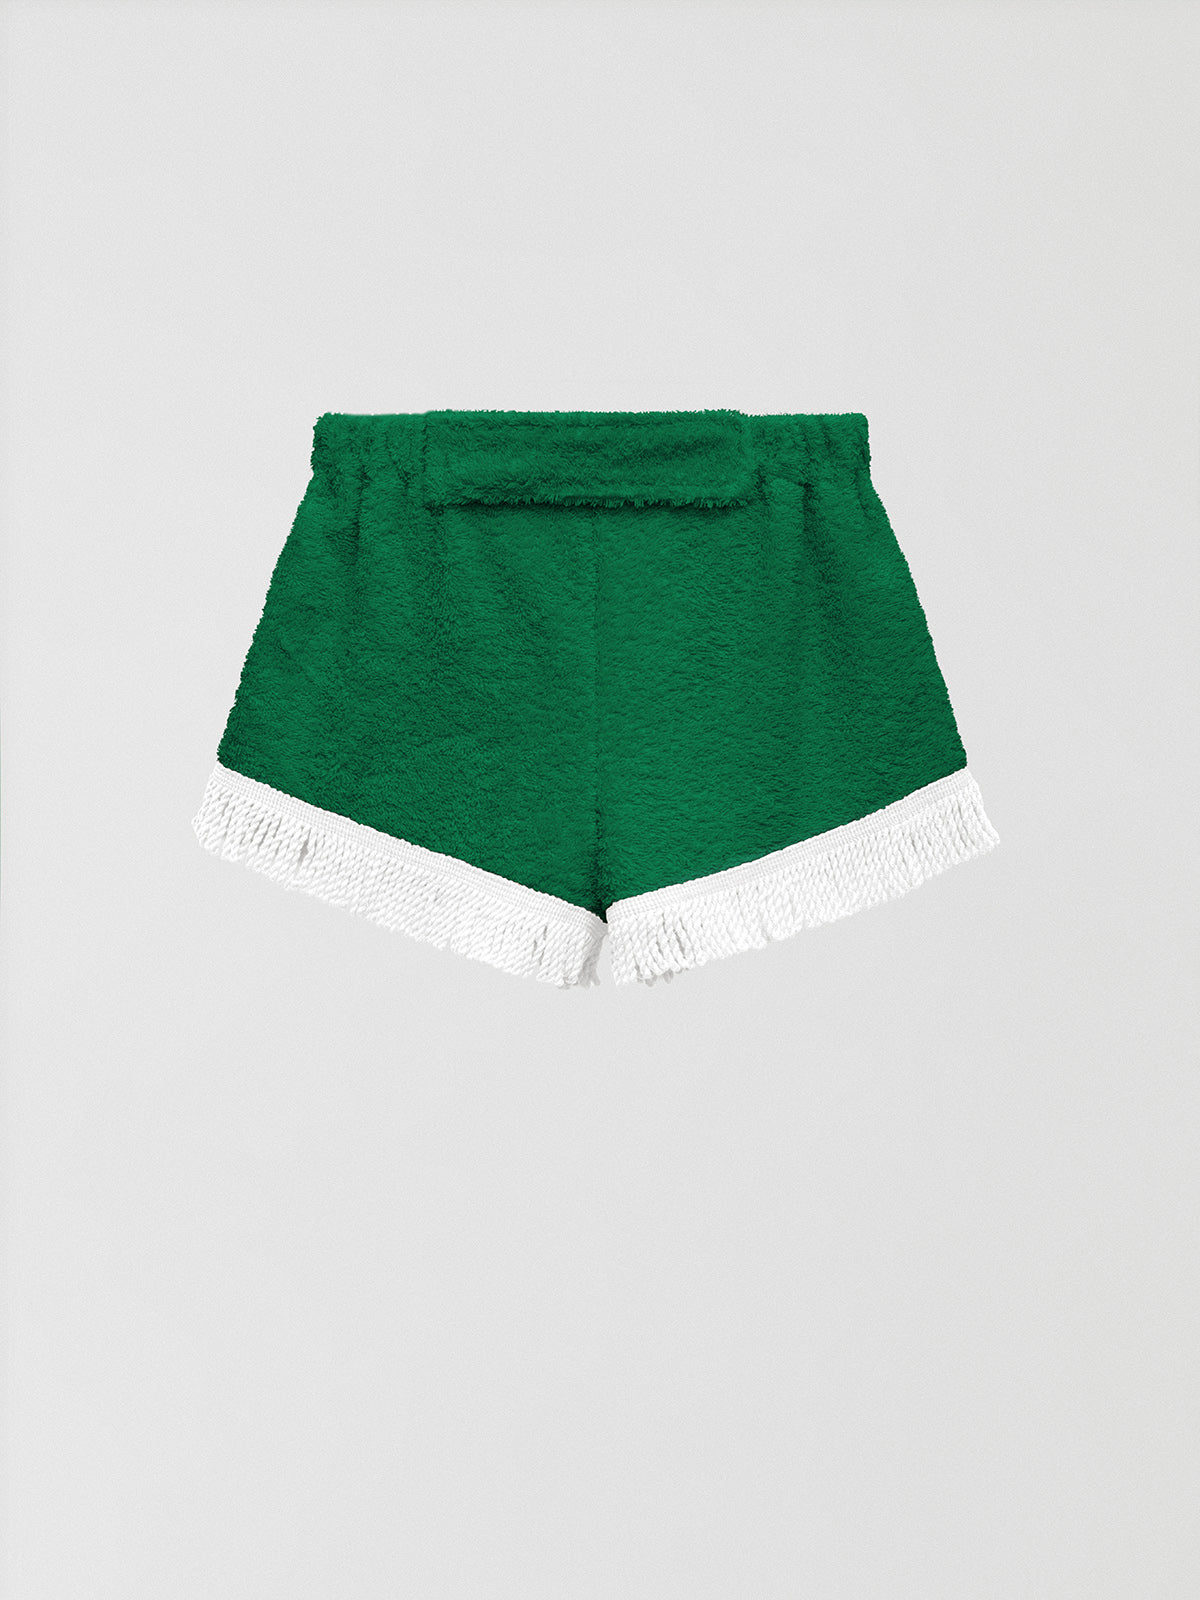 Towel shorts made in green cotton with white fringe.